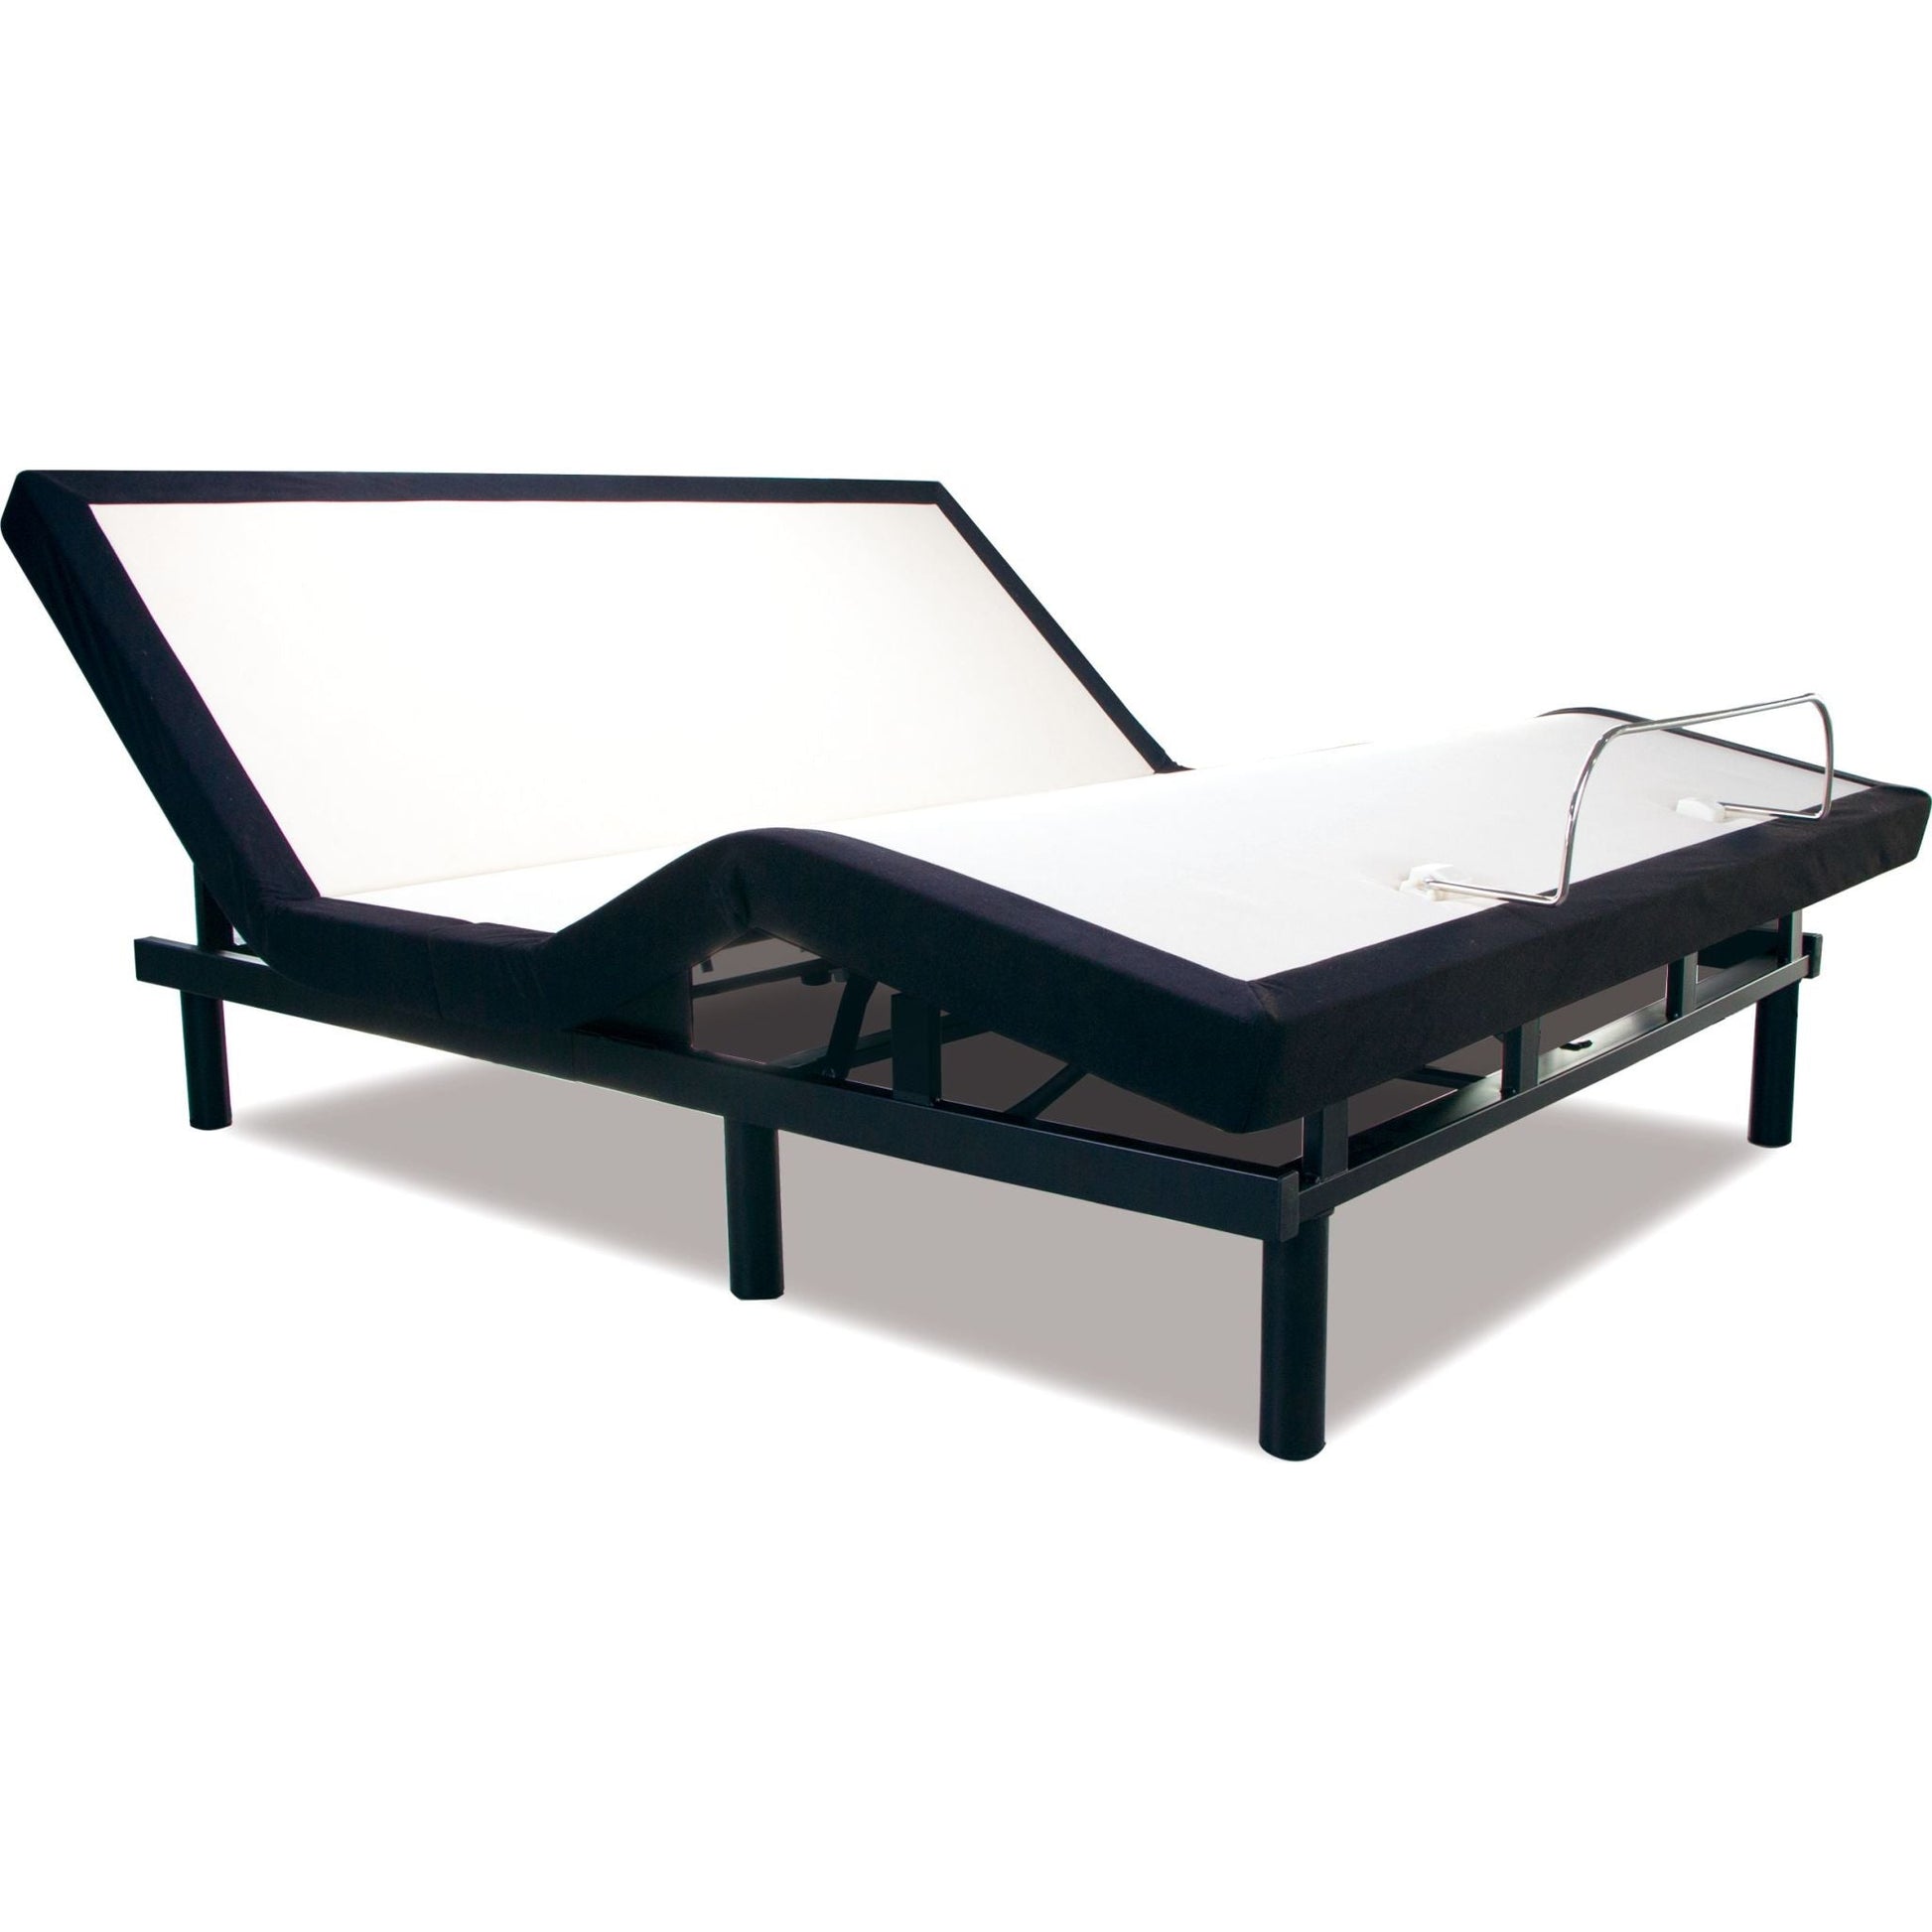 Sealy Reflexion® Boost 2.0 Lifestyle Adjustable Bed